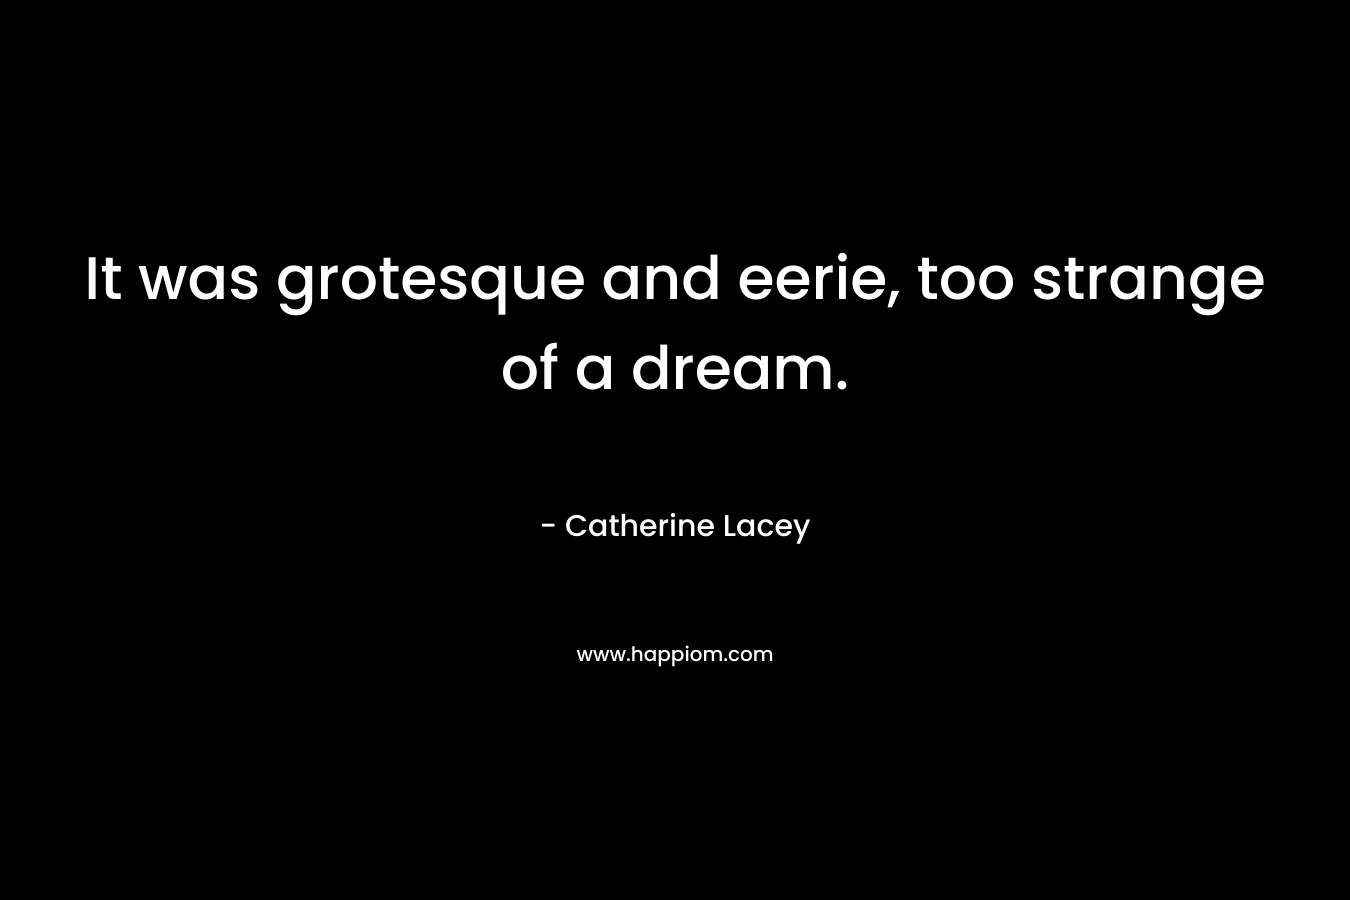 It was grotesque and eerie, too strange of a dream. – Catherine Lacey